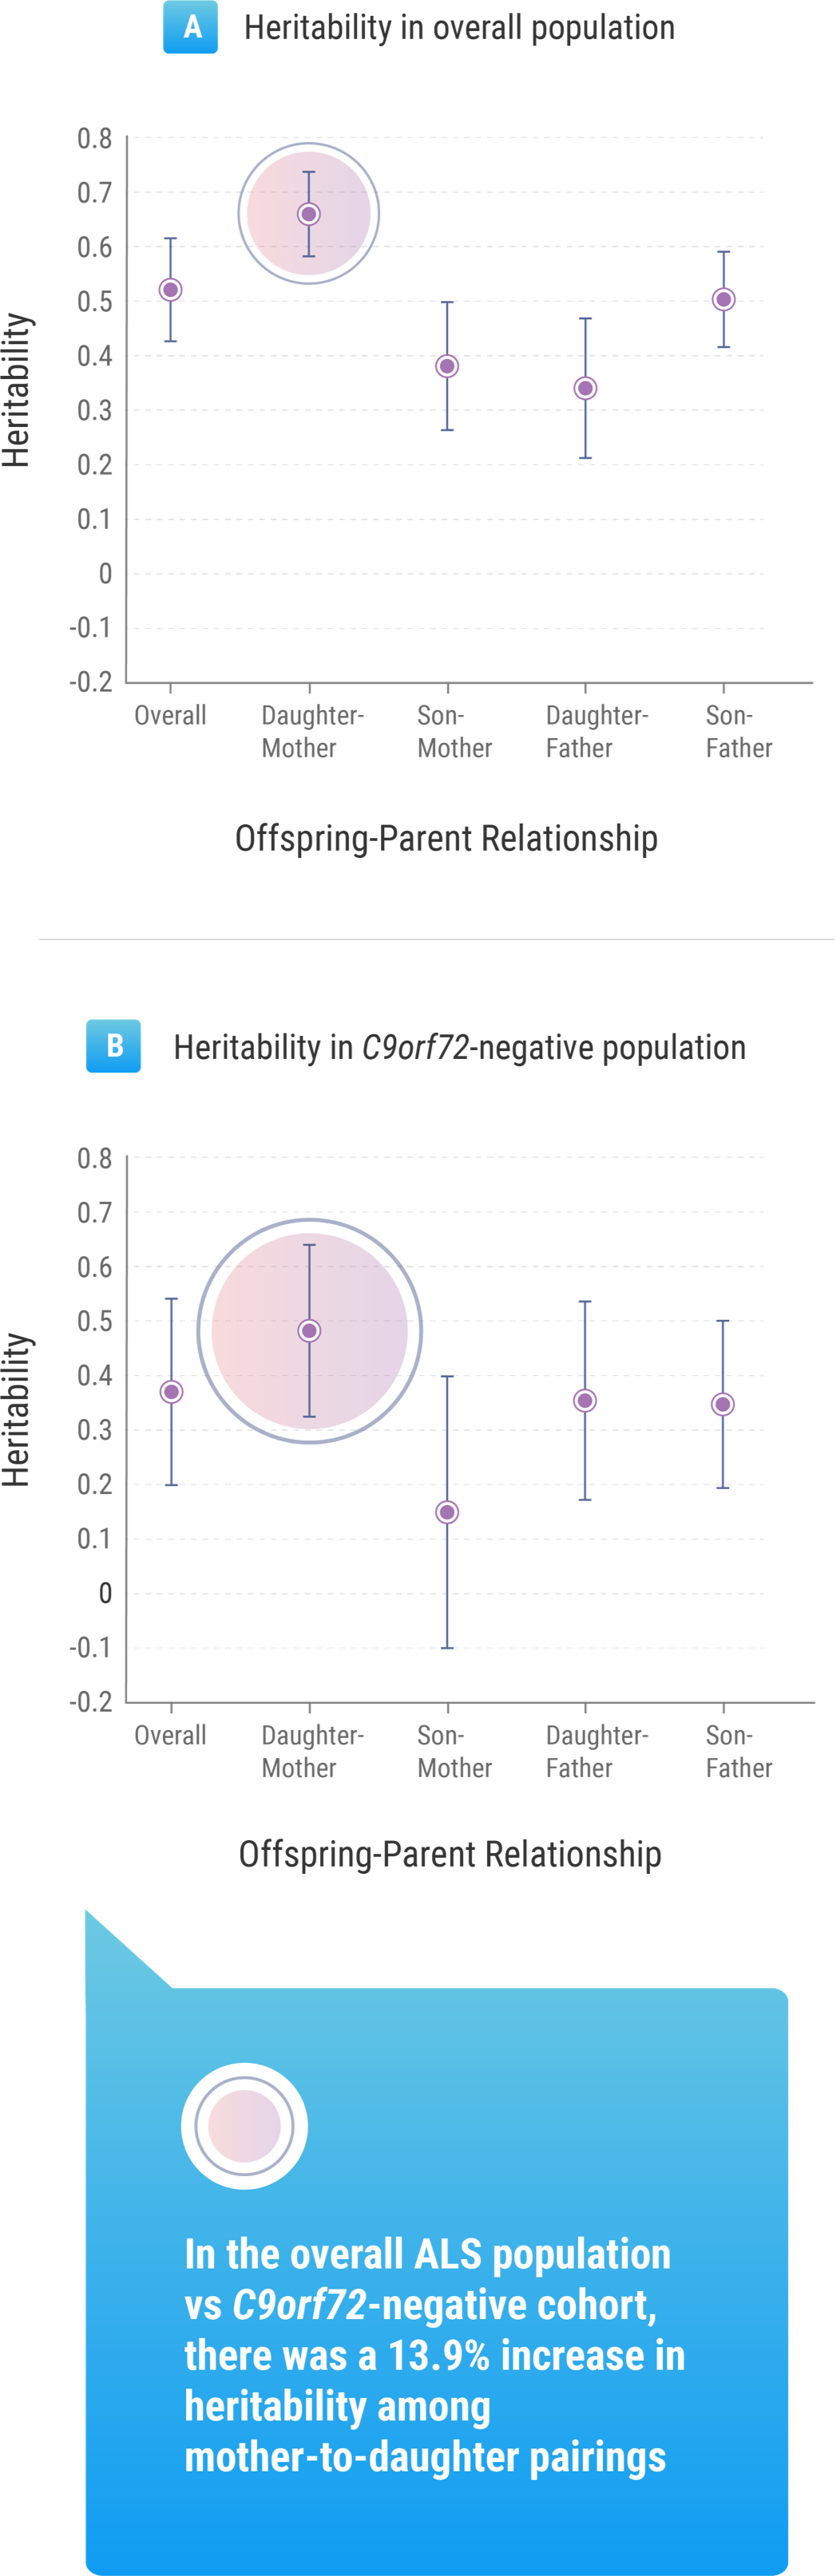 Graphs about sex-specific heritability estimates (indicating a 13.9% increase in heritability among mother-to-daughter pairings).